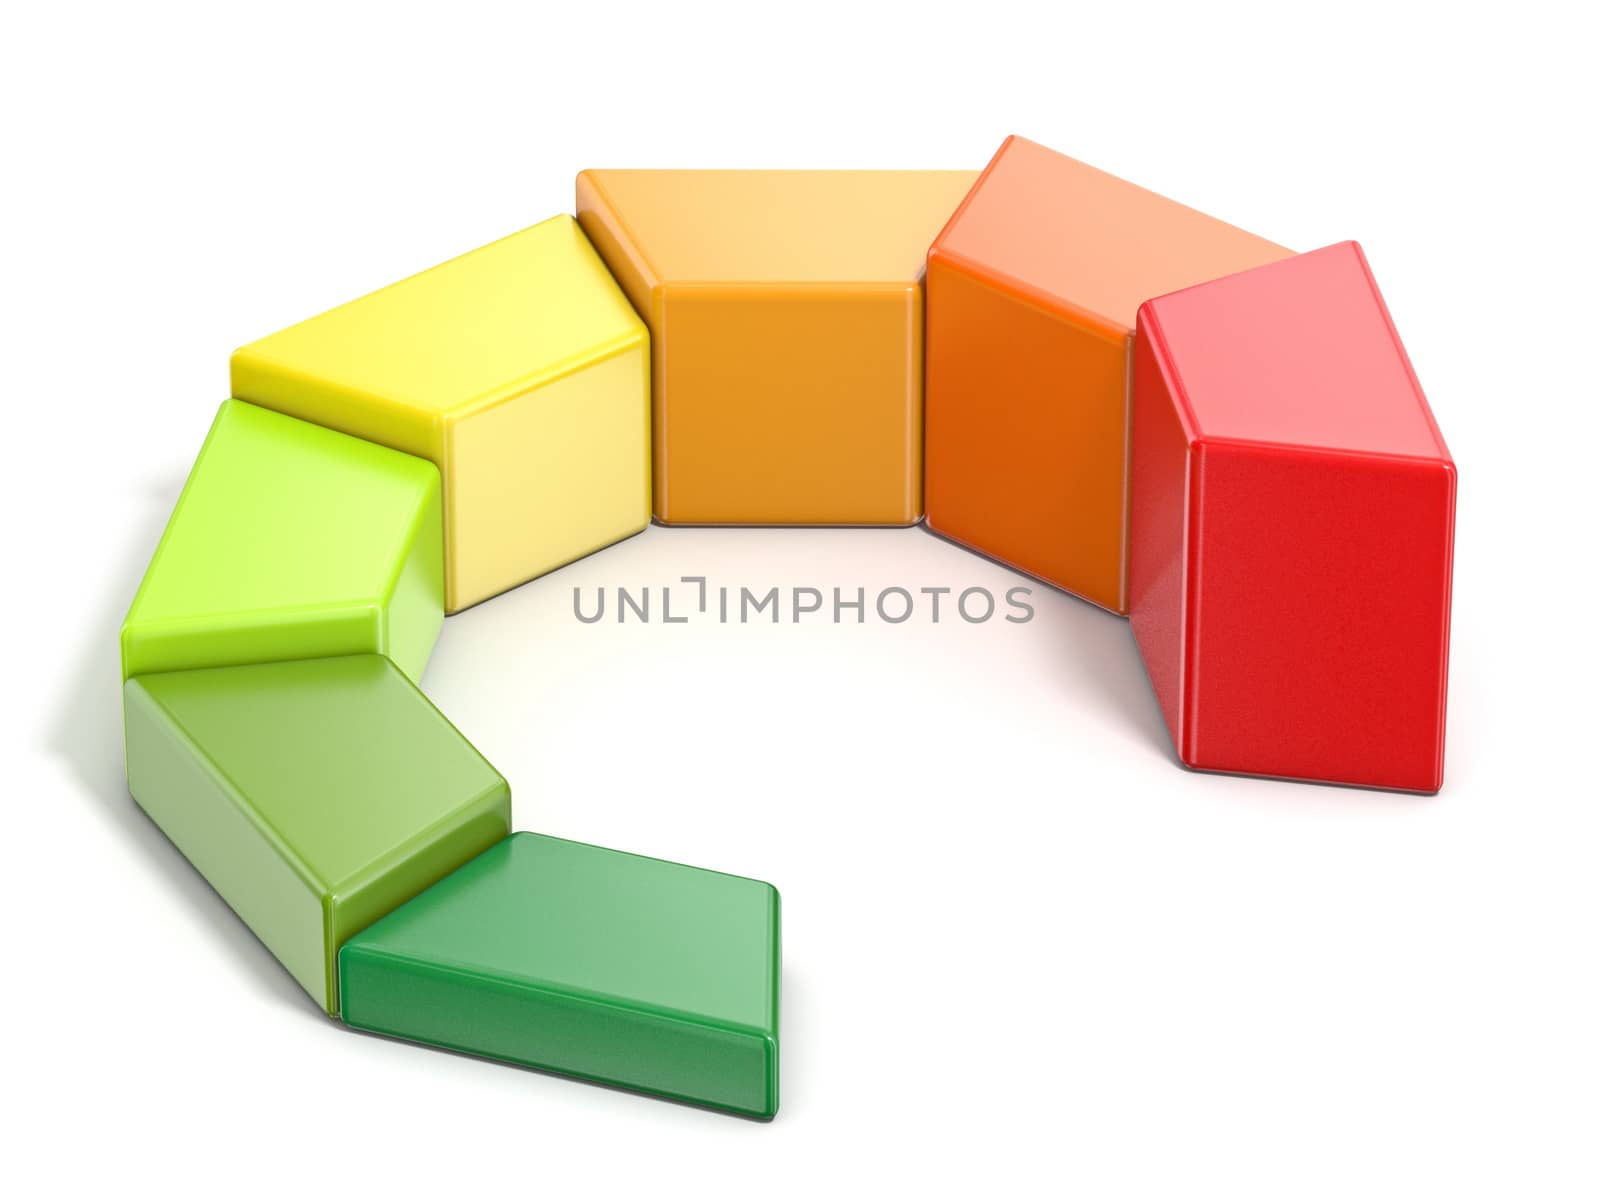 Pie chart seven levels of energetic efficiency 3D render illustration isolated on white background